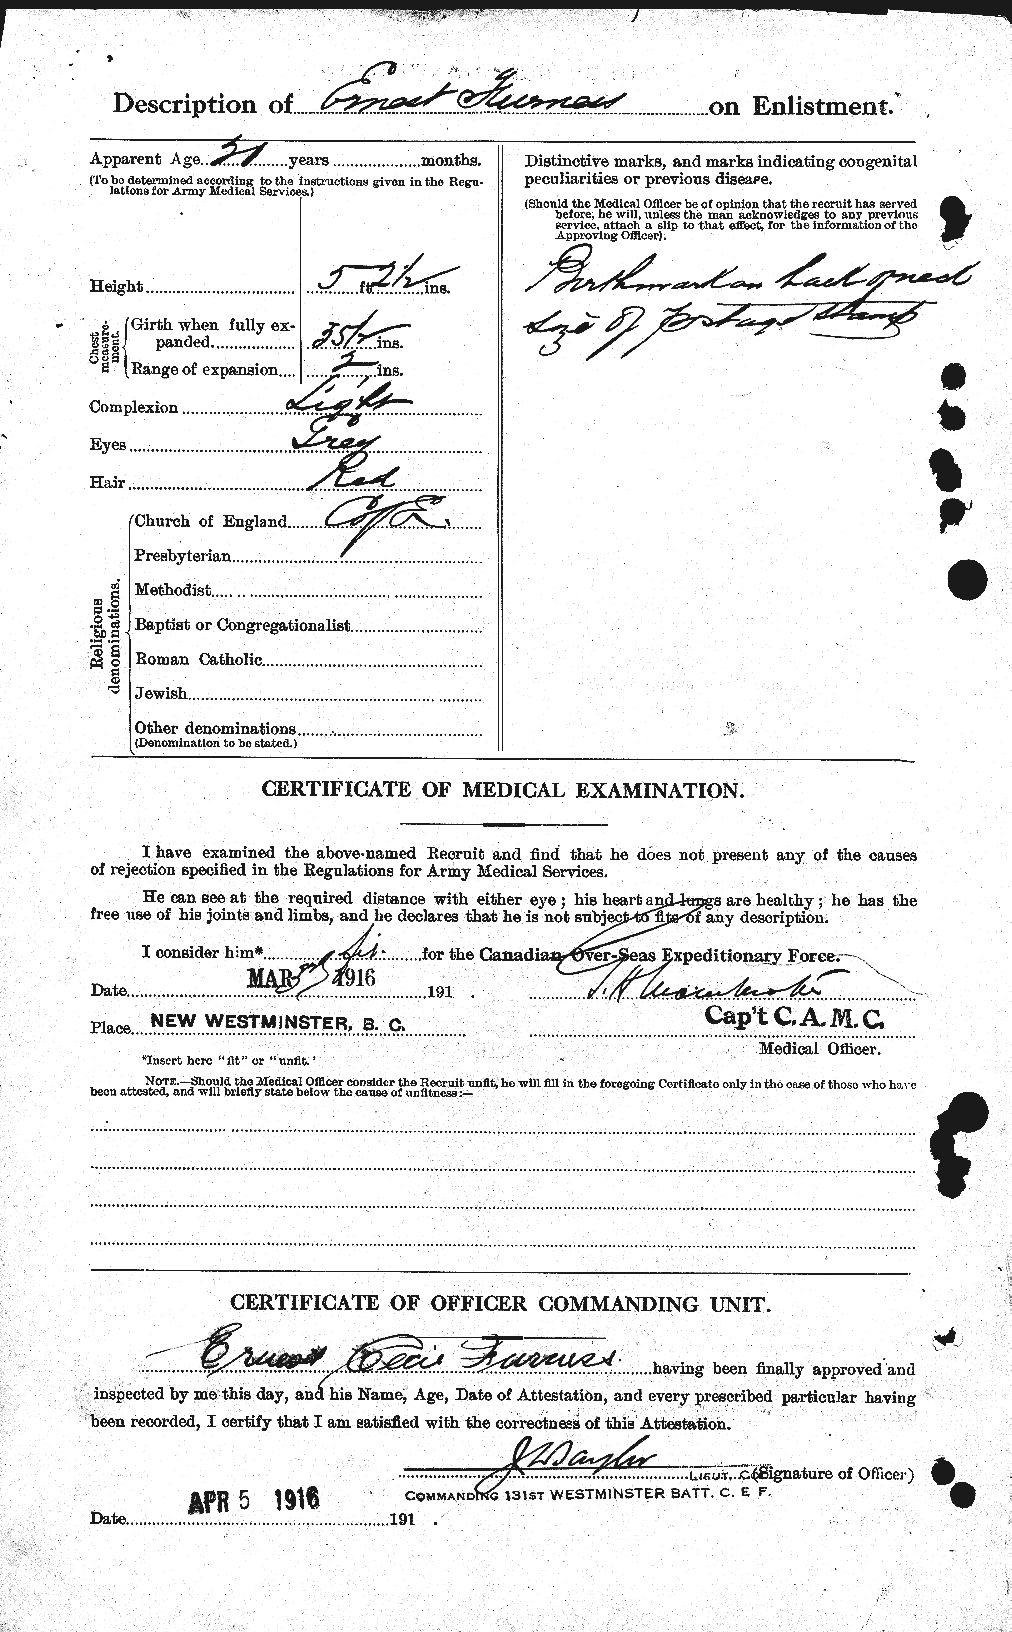 Personnel Records of the First World War - CEF 335467b